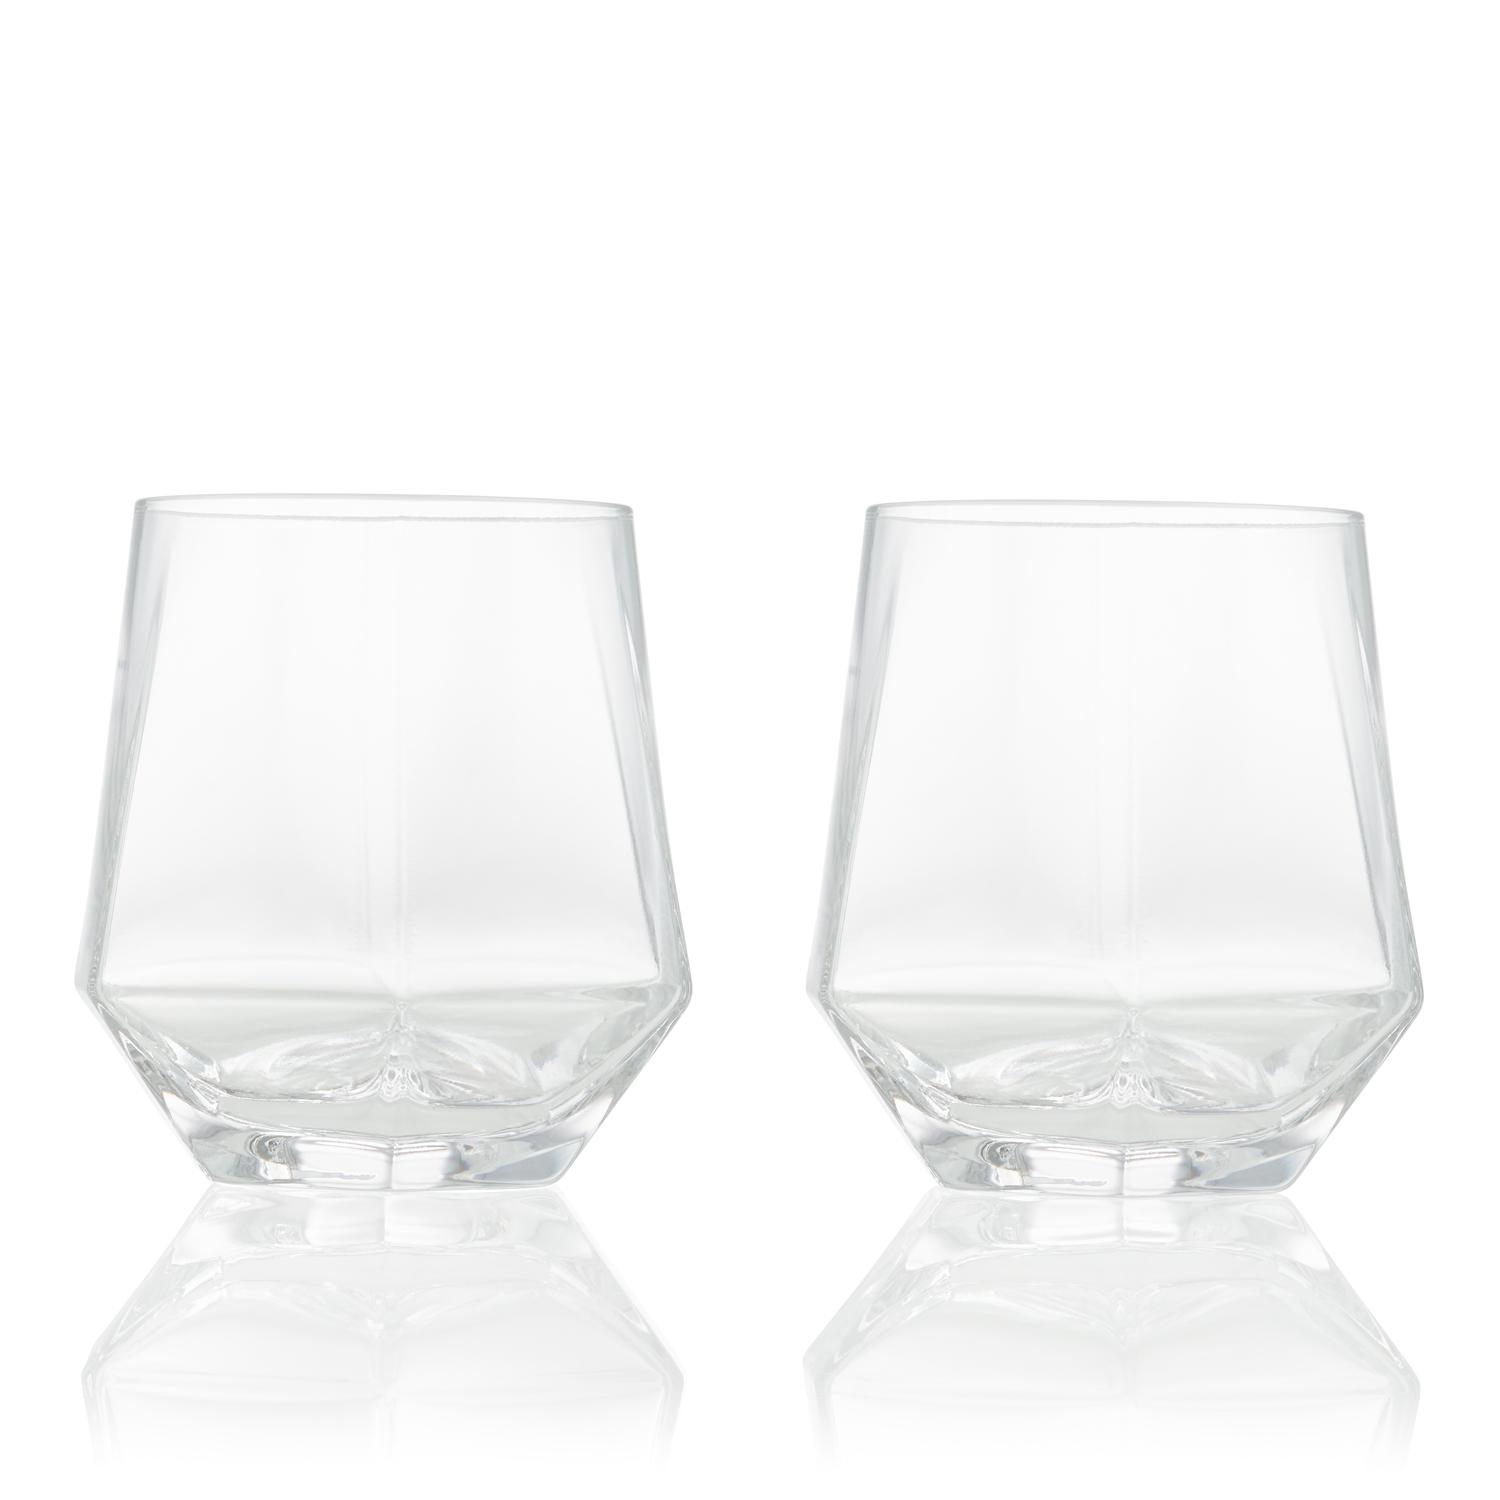 Uberstar Faceted Glasses - Only £14.99 (Pair)